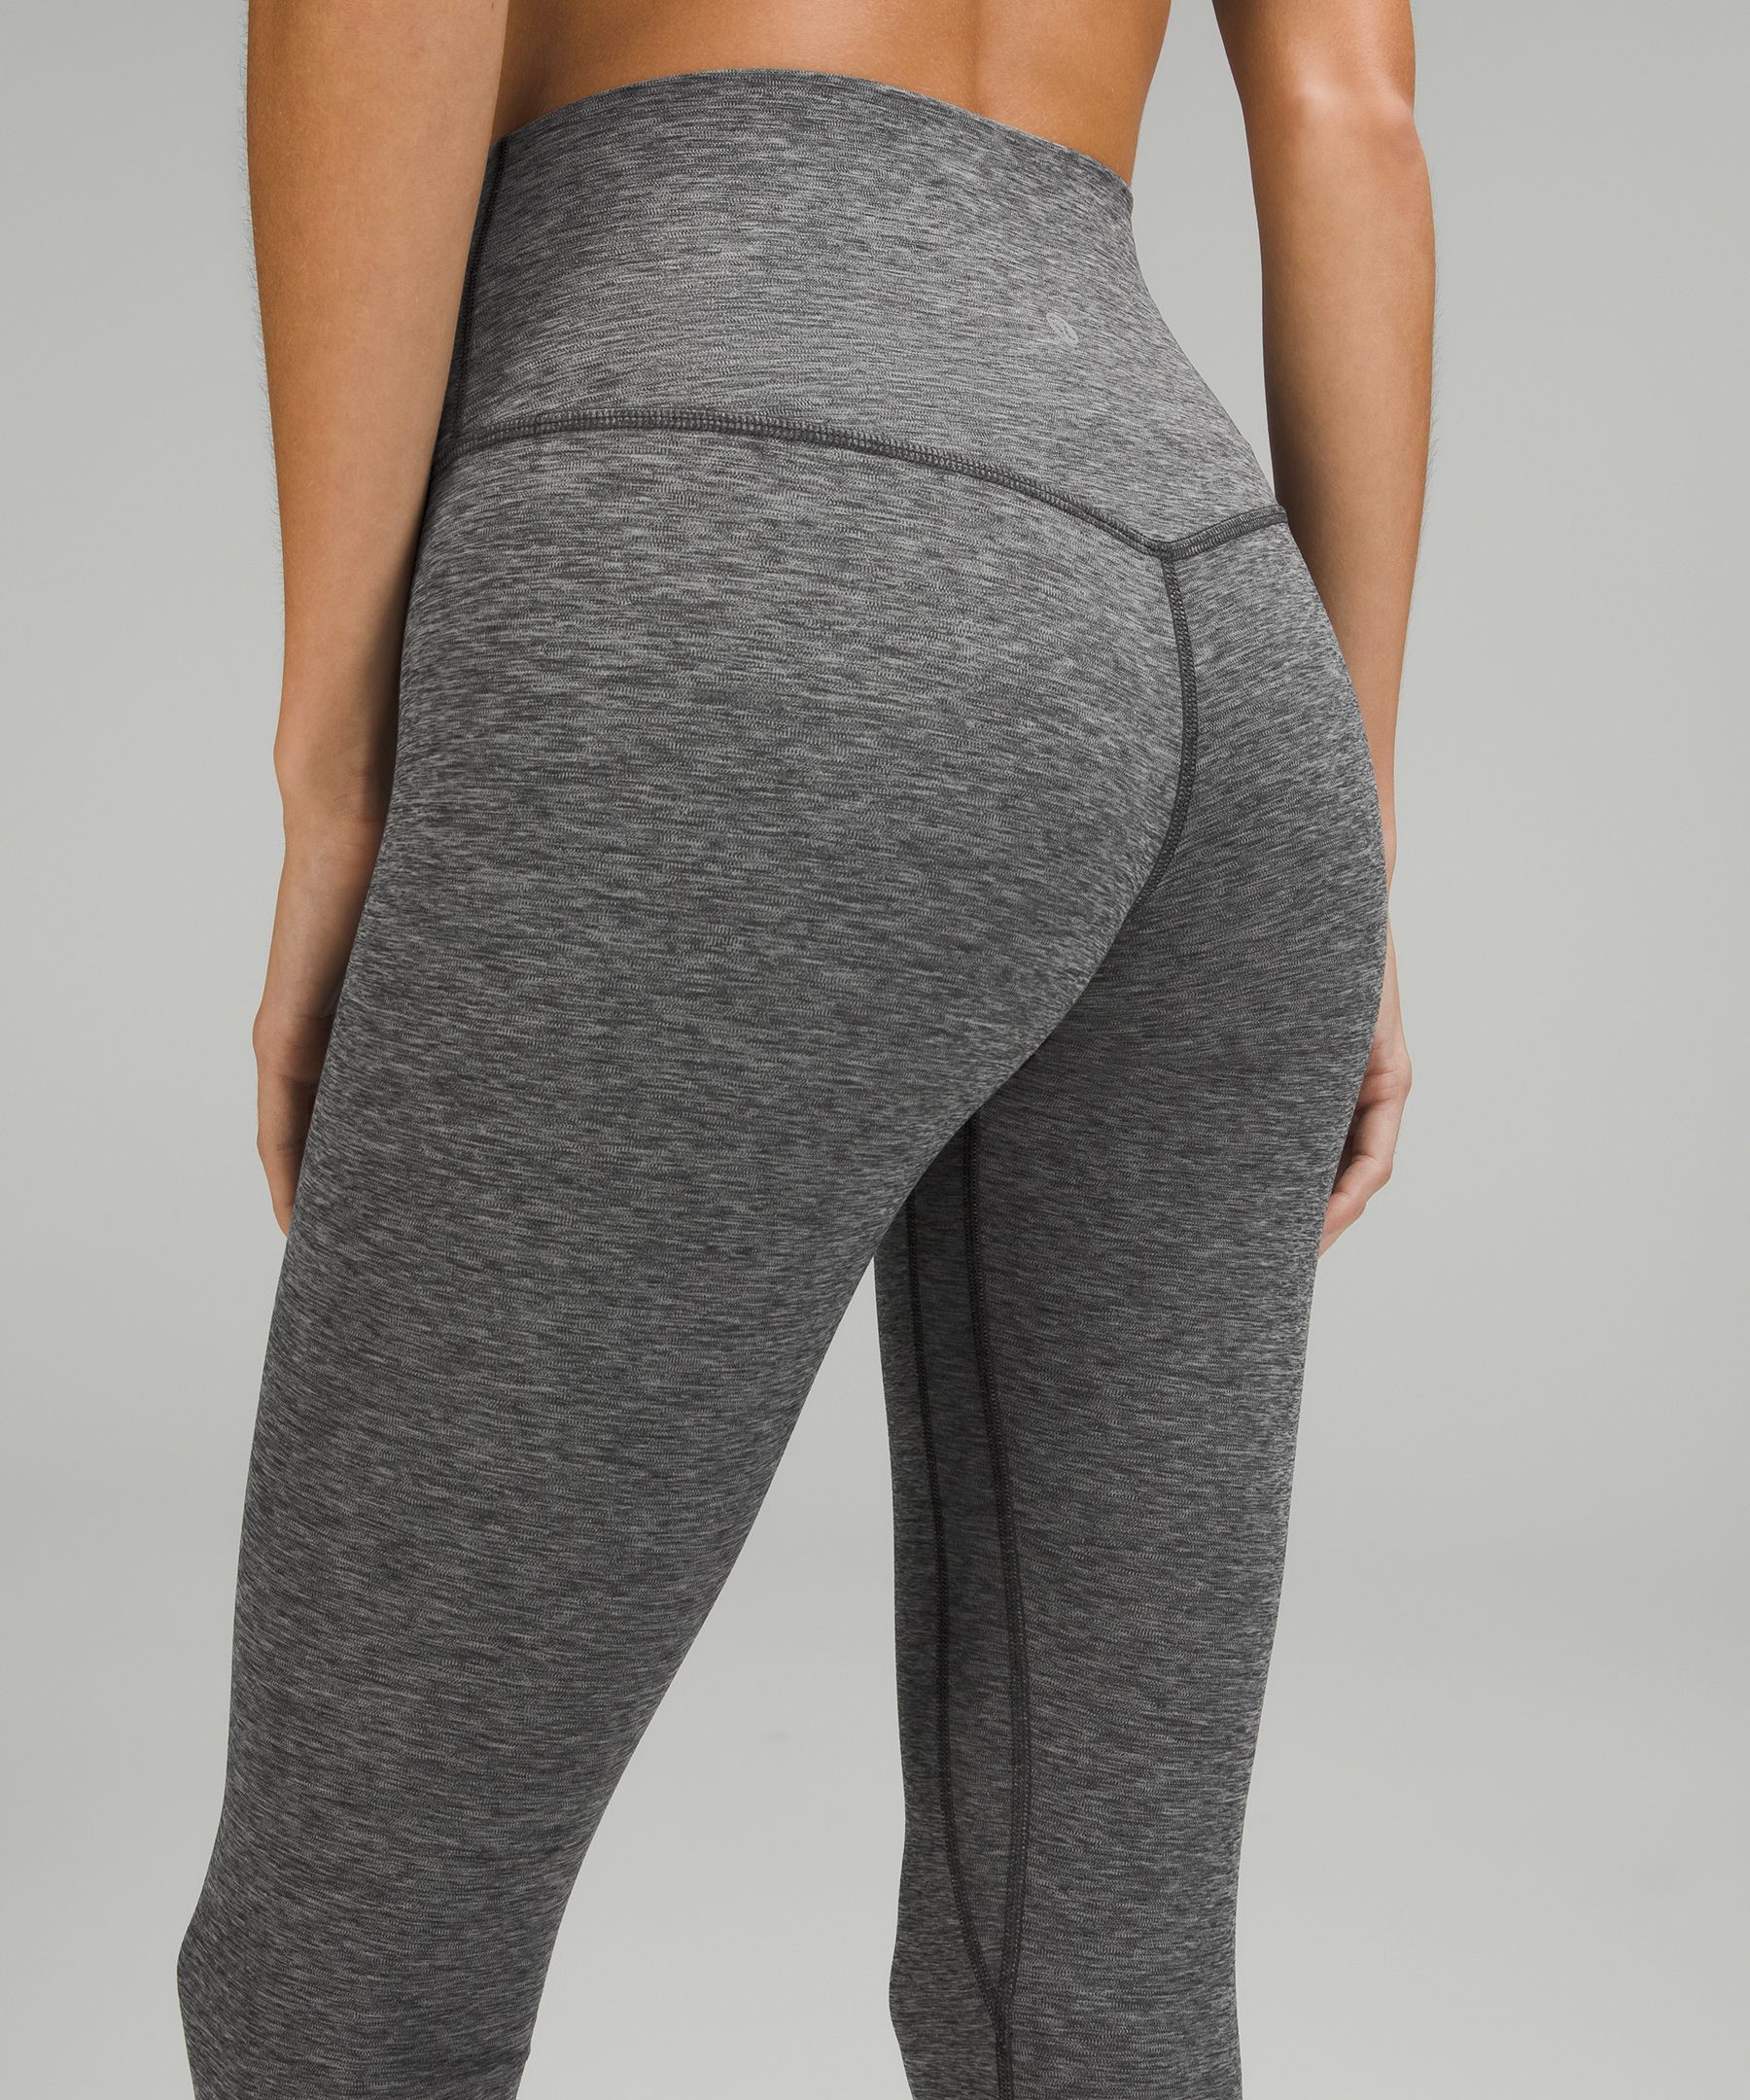 Lululemon Align Size 14 - $128 New With Tags - From Tinnie